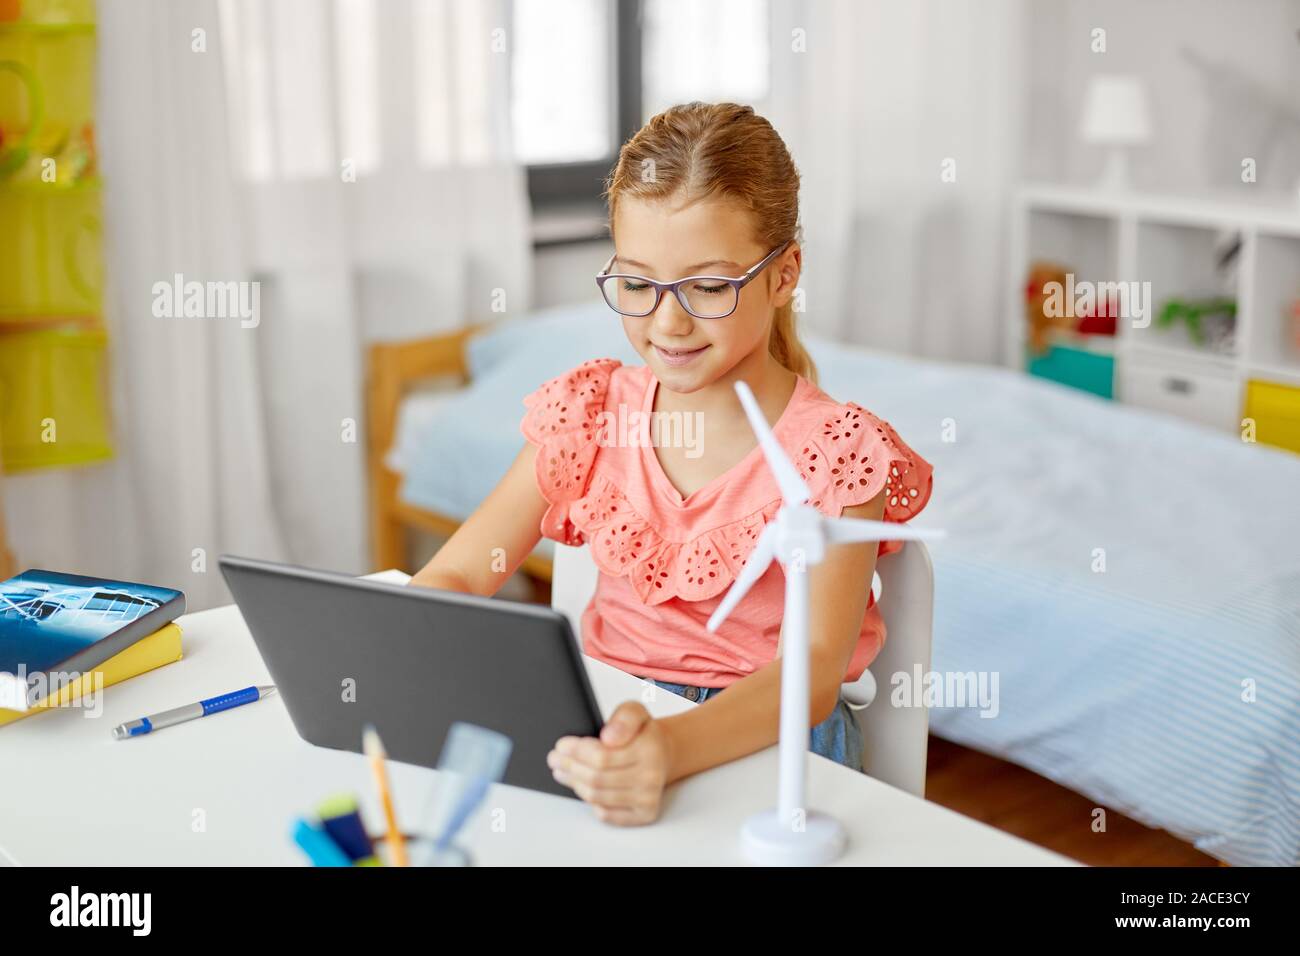 student girl with tablet pc and wind turbine model Stock Photo